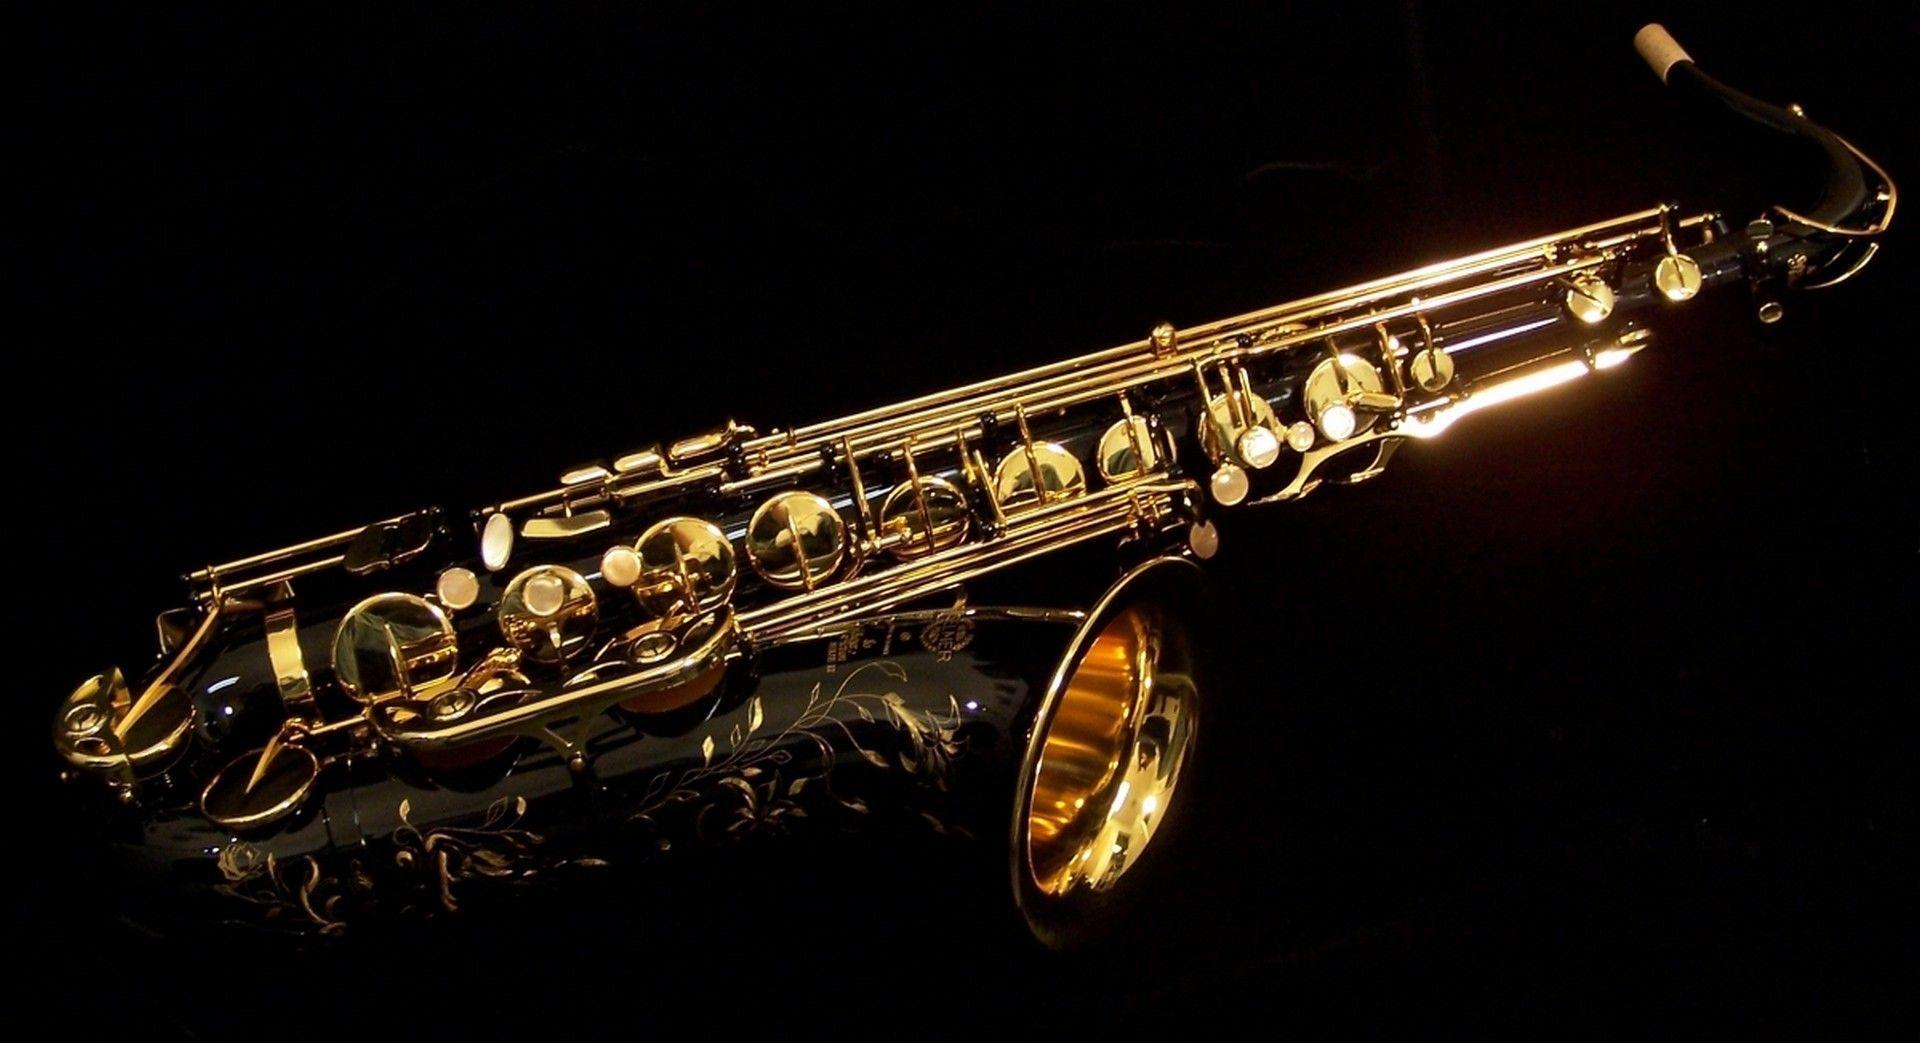 Wallpaper : sax, saxophone, instrument, instruments, music, musical, brass,  wind, Jazz, sheet, notes, engineering, baker, street, solo, performance,  reflection, Note, metal, shiny 7952x5304 - - 928909 - HD Wallpapers -  WallHere